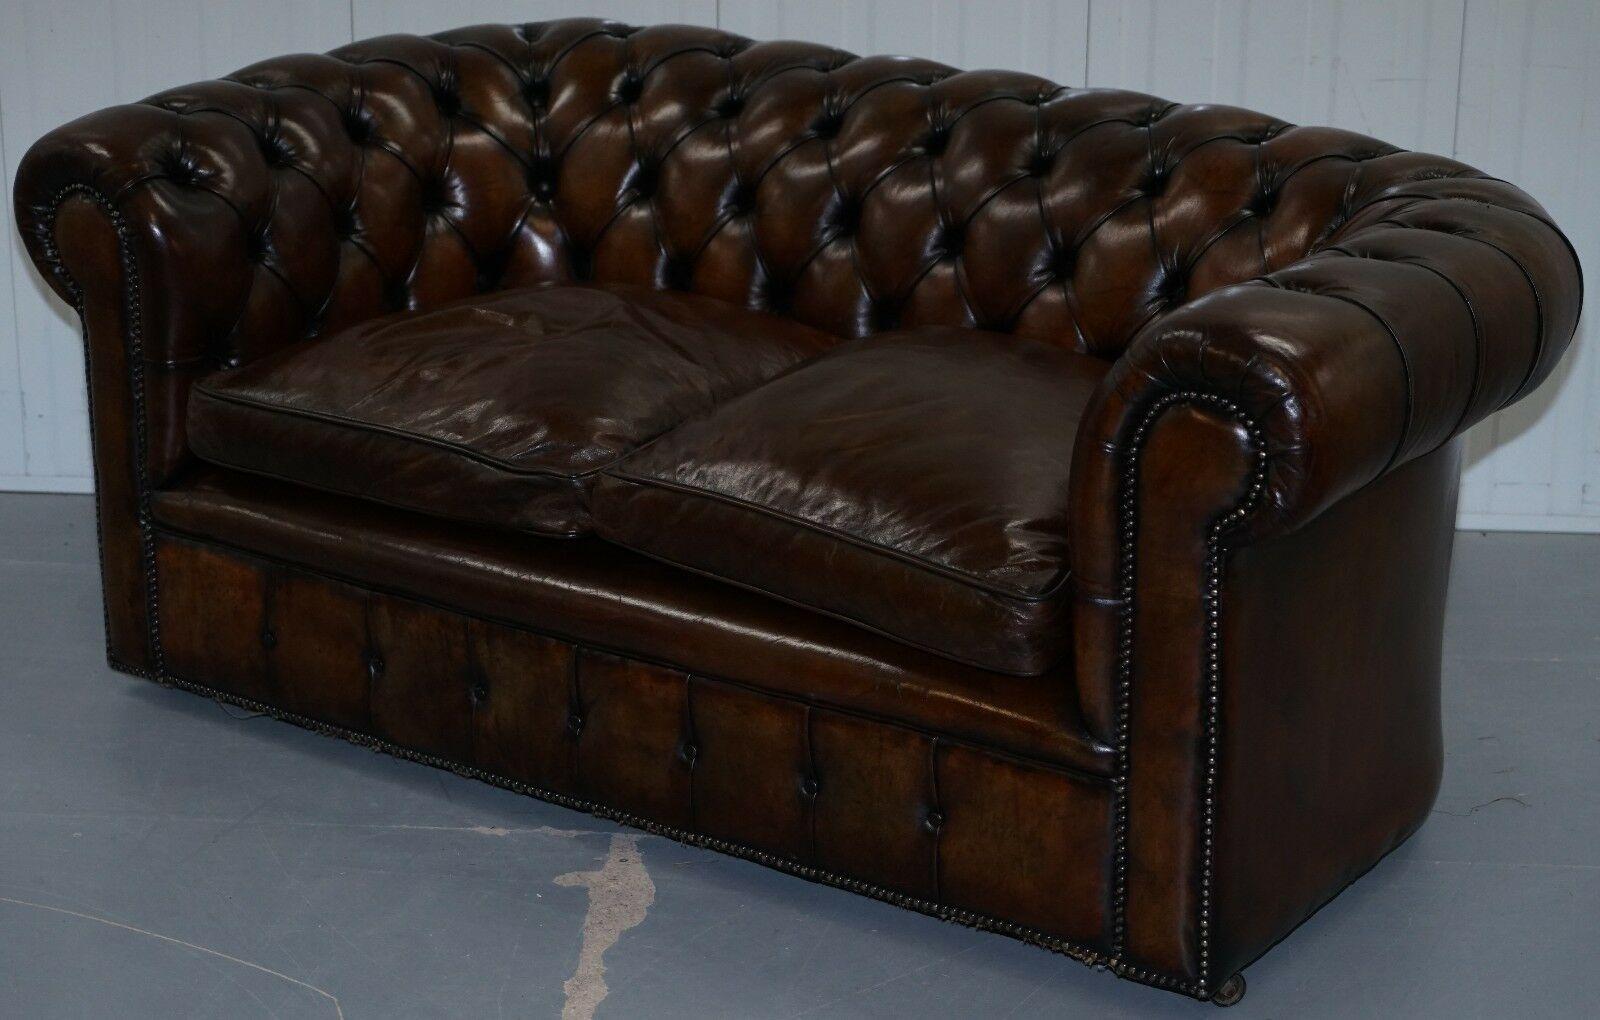 We are delighted to offer for sale this exceptionally rare original 1930s cigar brown leather Chesterfield club sofa in newly restored condition with feather filled cushions.

A really very rare find, you almost never come across early 20th